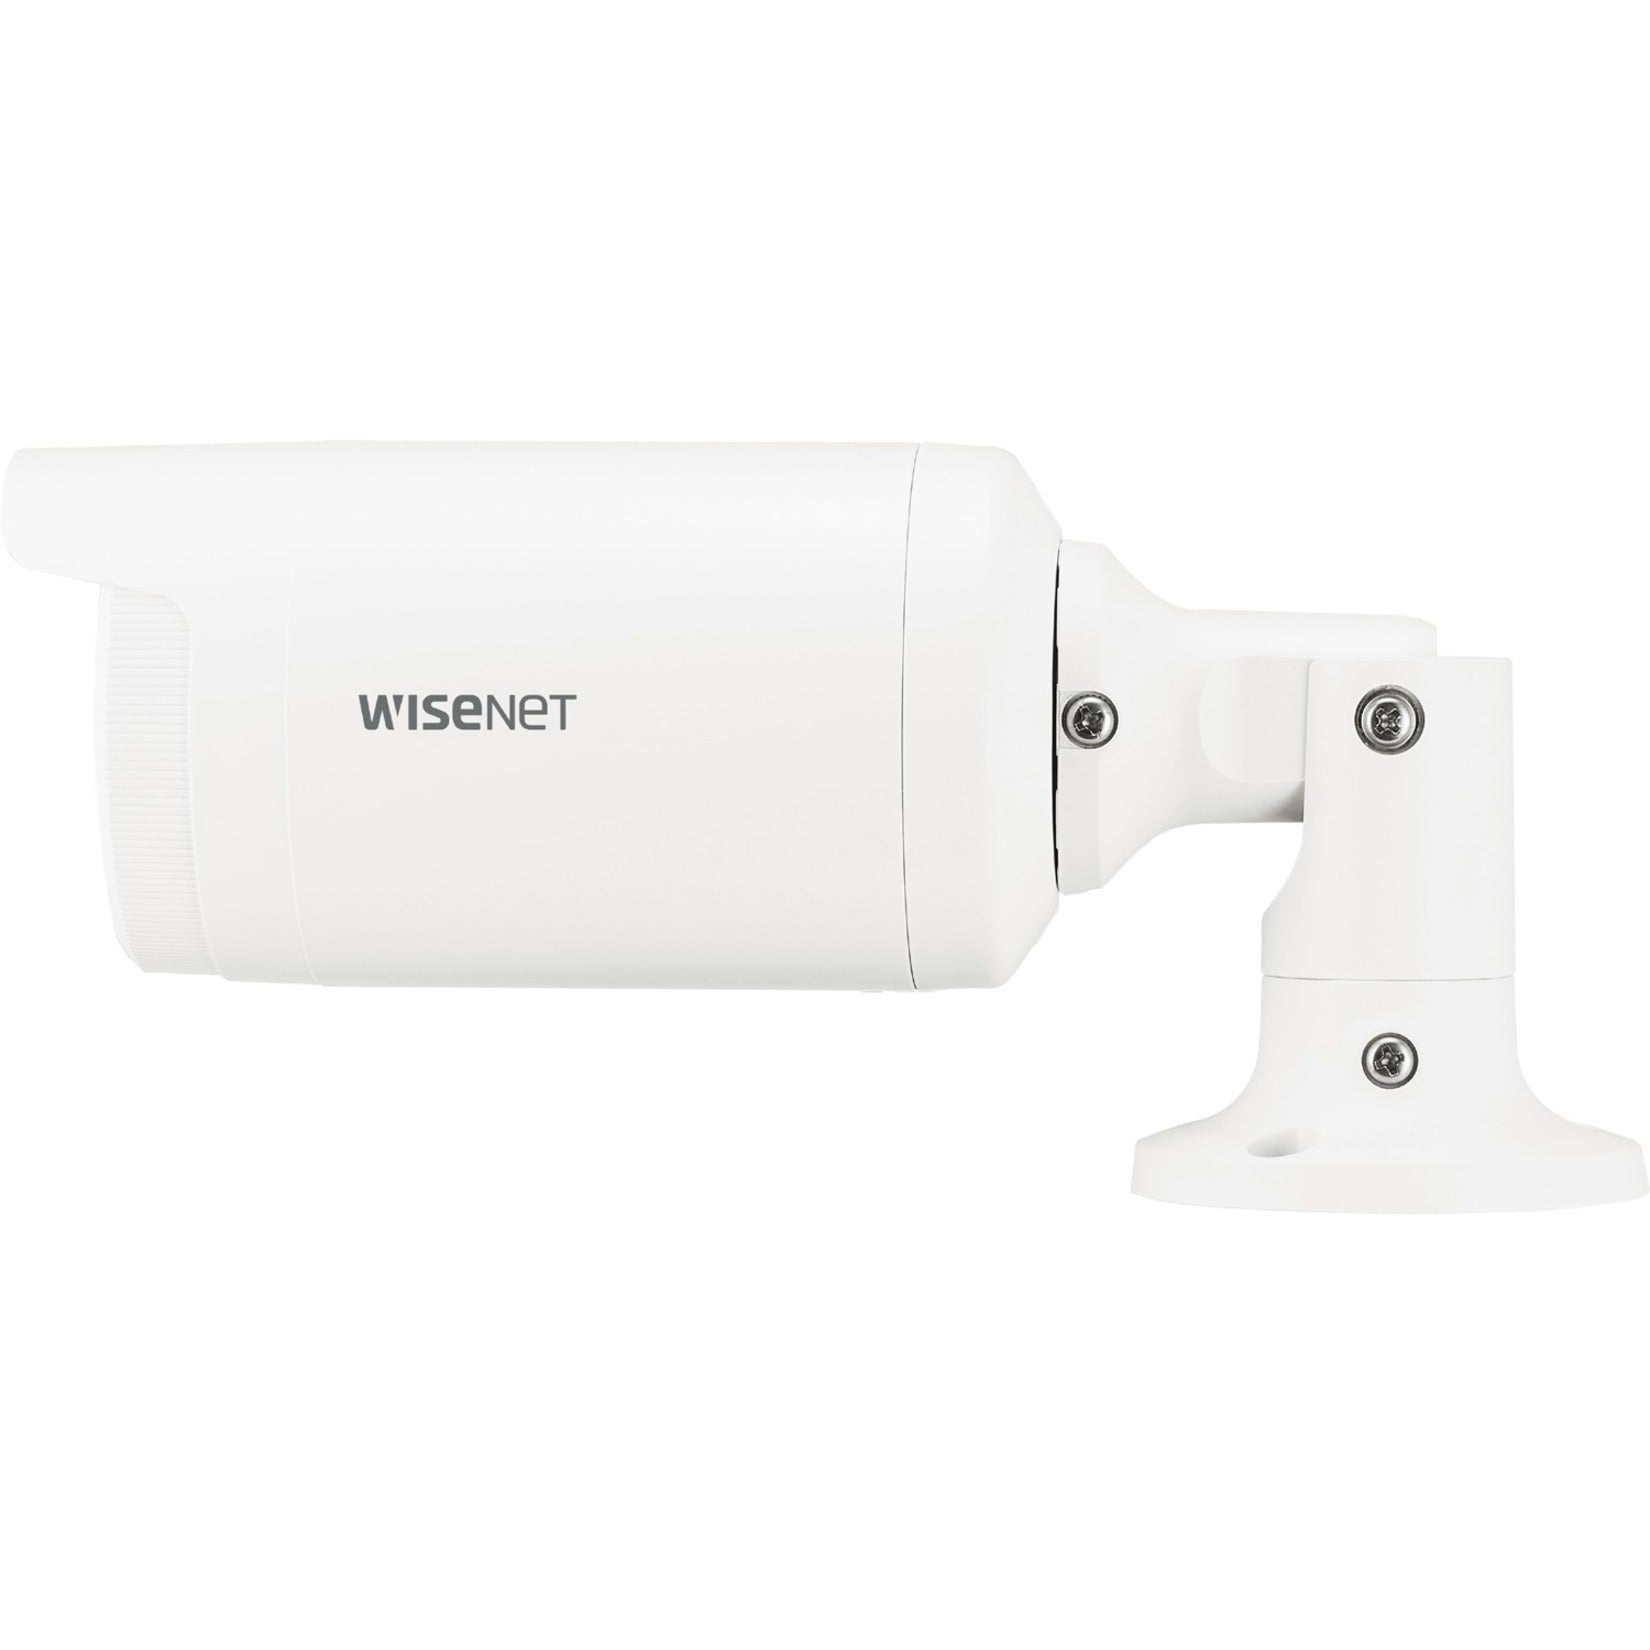 Wisenet ANO-L6022R 2MP IR Bullet Camera, Full HD, Color, Motion Detection, IP66